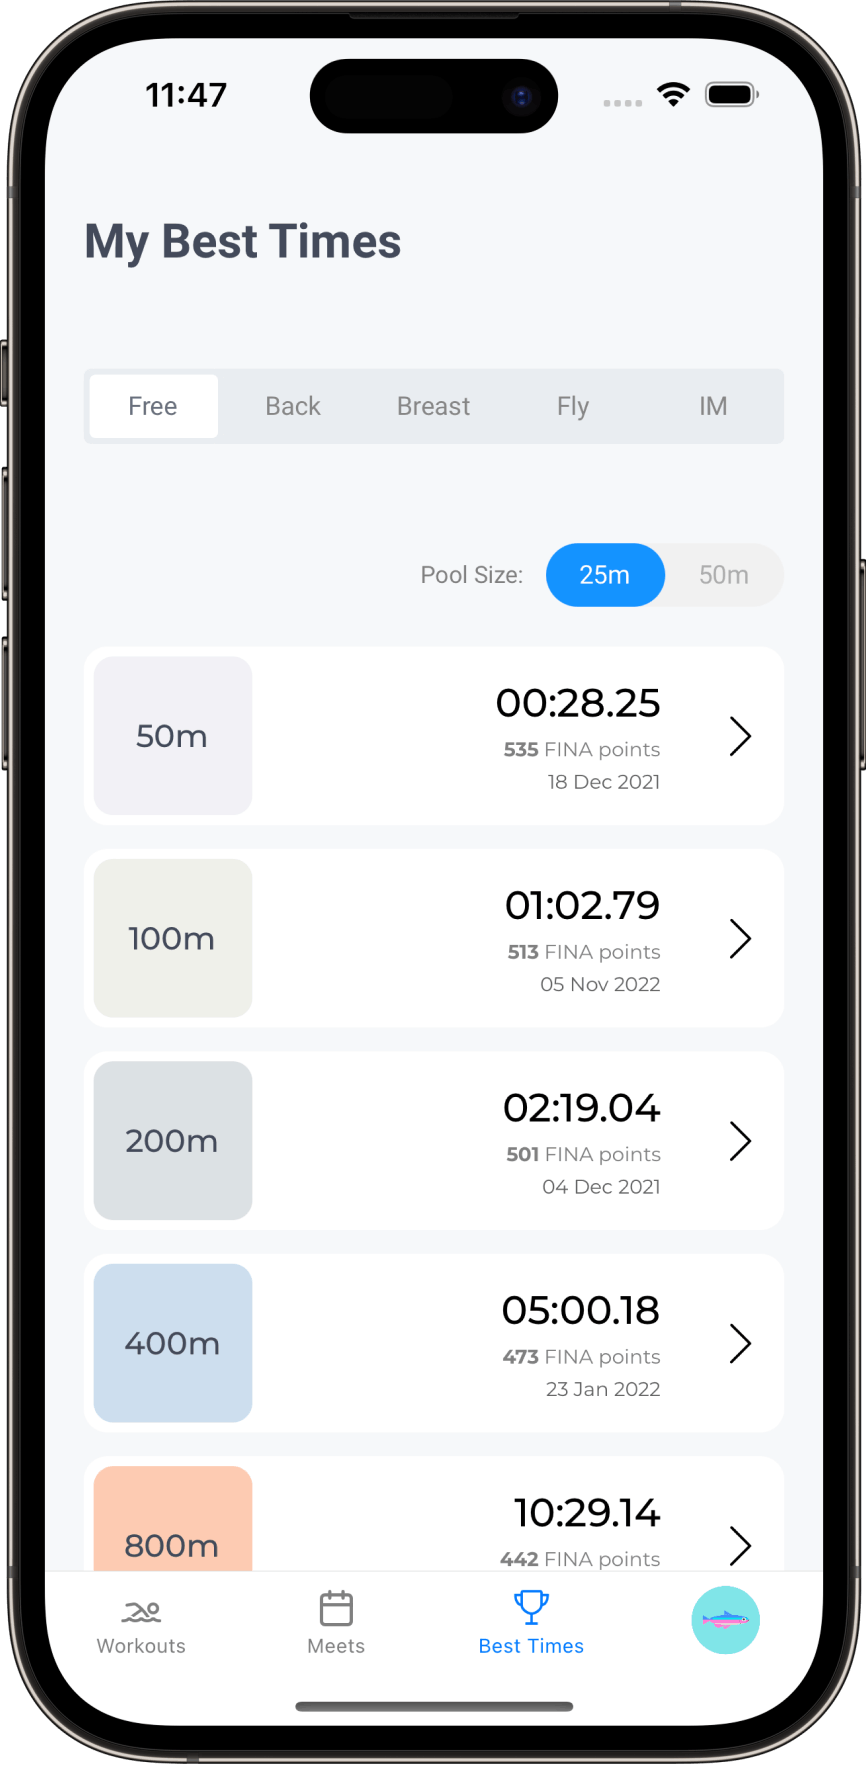 App screenshot of My Best Times page